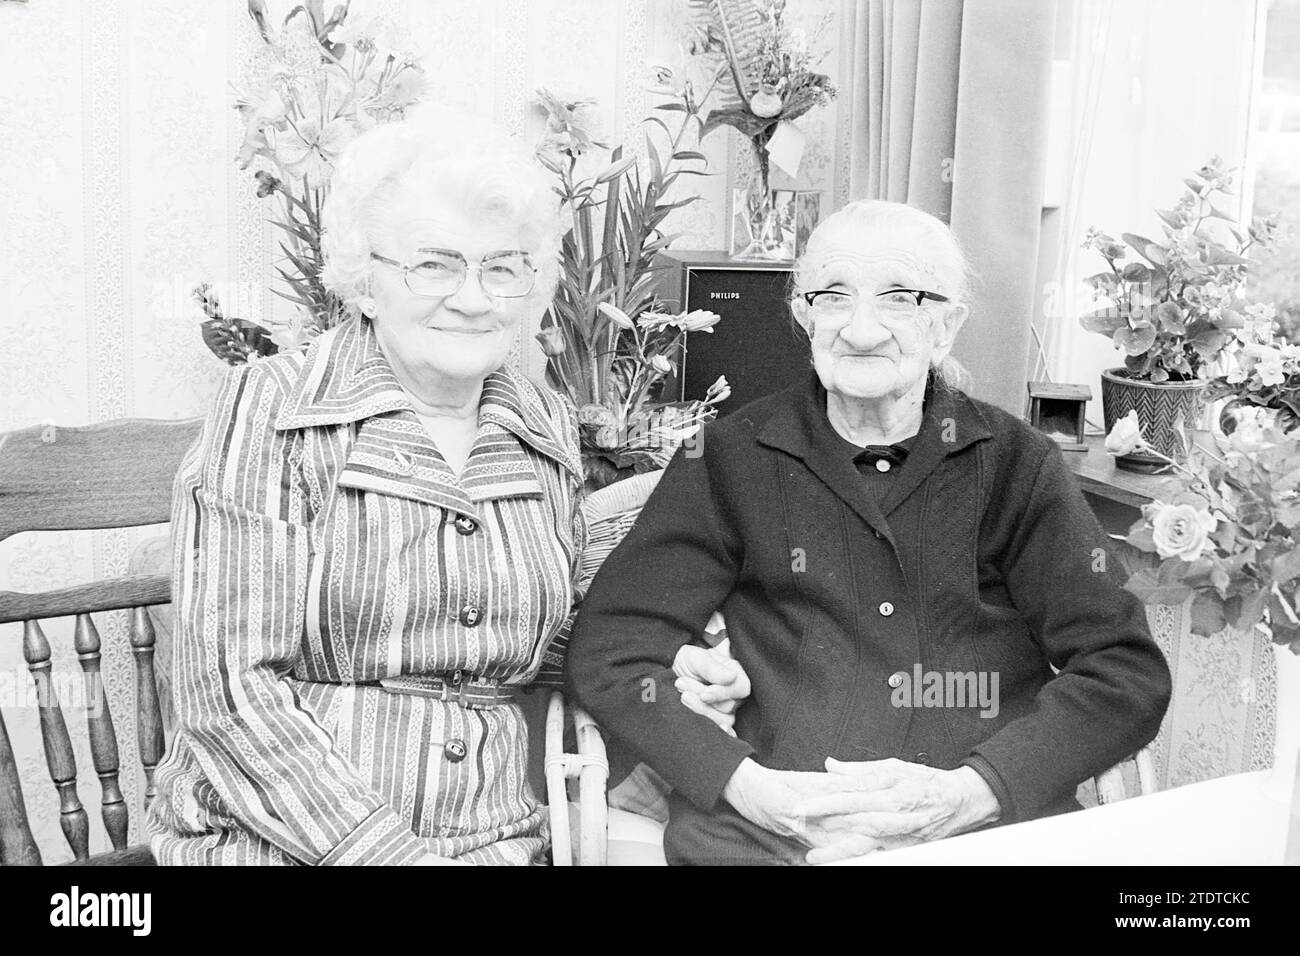 Mrs. van. Lions 103 years old, Centenarians, one hundred years, 19-05-1977, Whizgle News from the Past, Tailored for the Future. Explore historical narratives, Dutch The Netherlands agency image with a modern perspective, bridging the gap between yesterday's events and tomorrow's insights. A timeless journey shaping the stories that shape our future Stock Photo